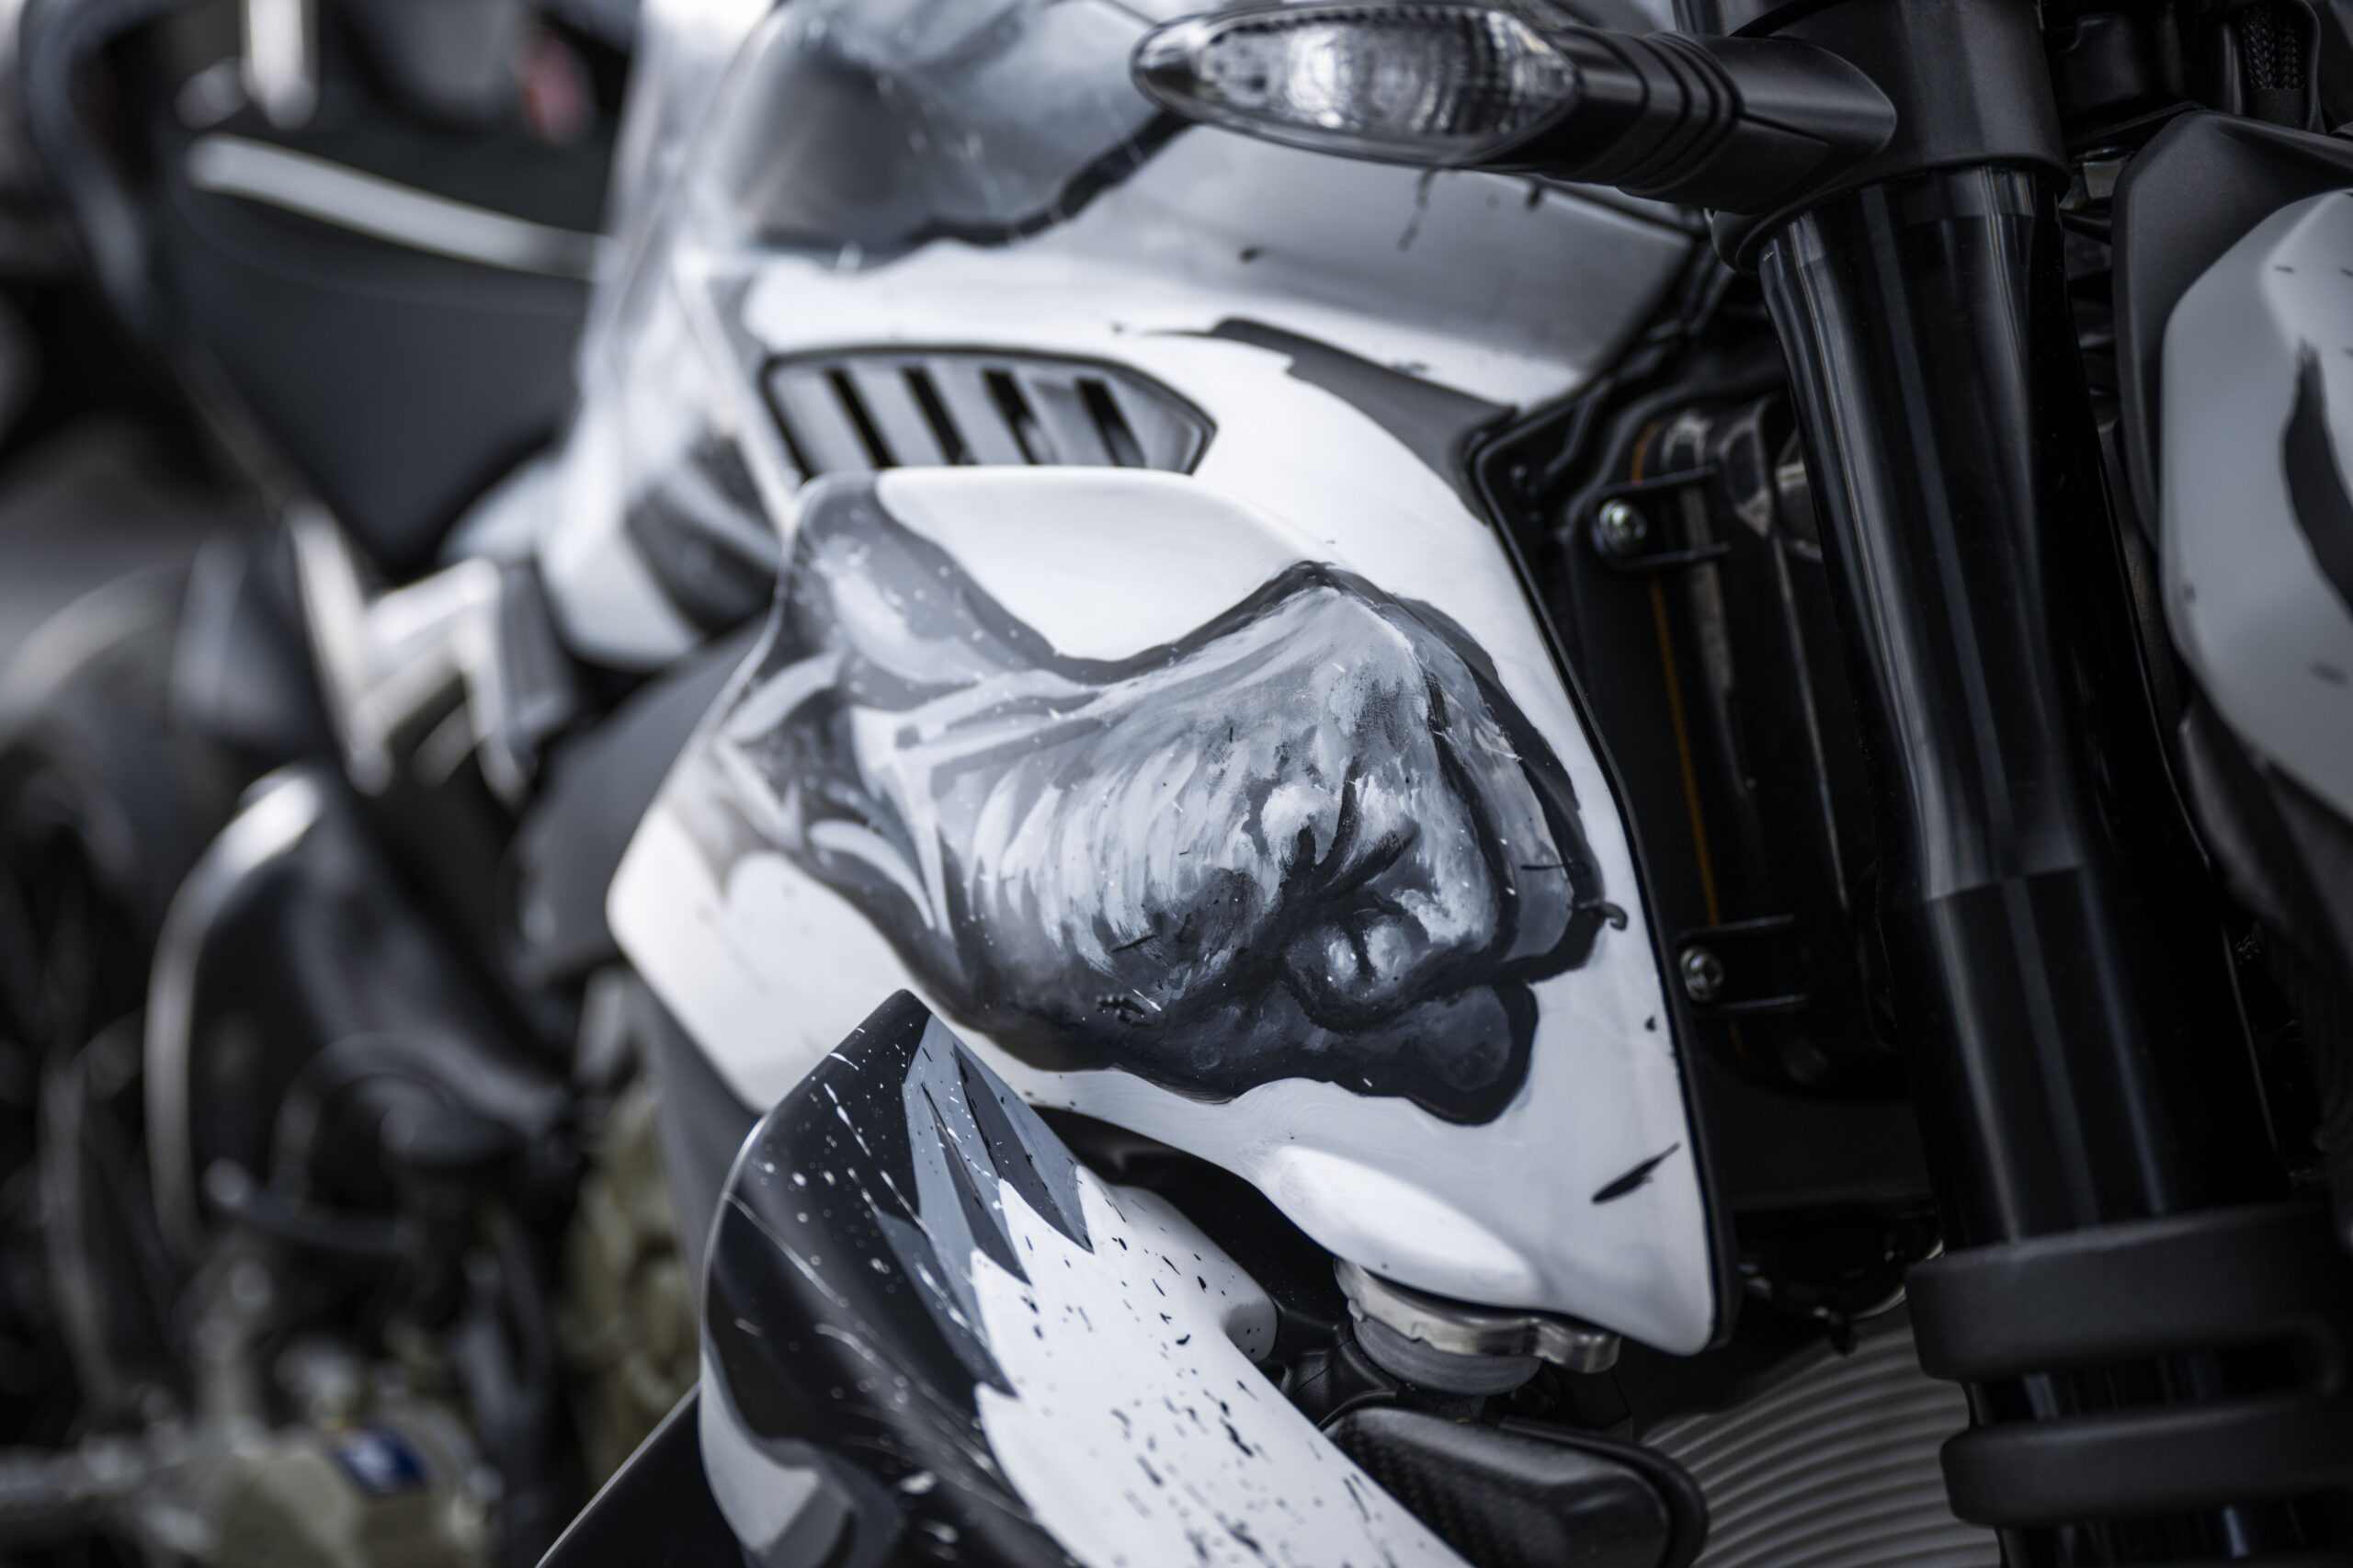 "Centauro", a work of art by Paolo Troilo painted on a Ducati Streetfighter V4 Lamborghini Speciale Clienti